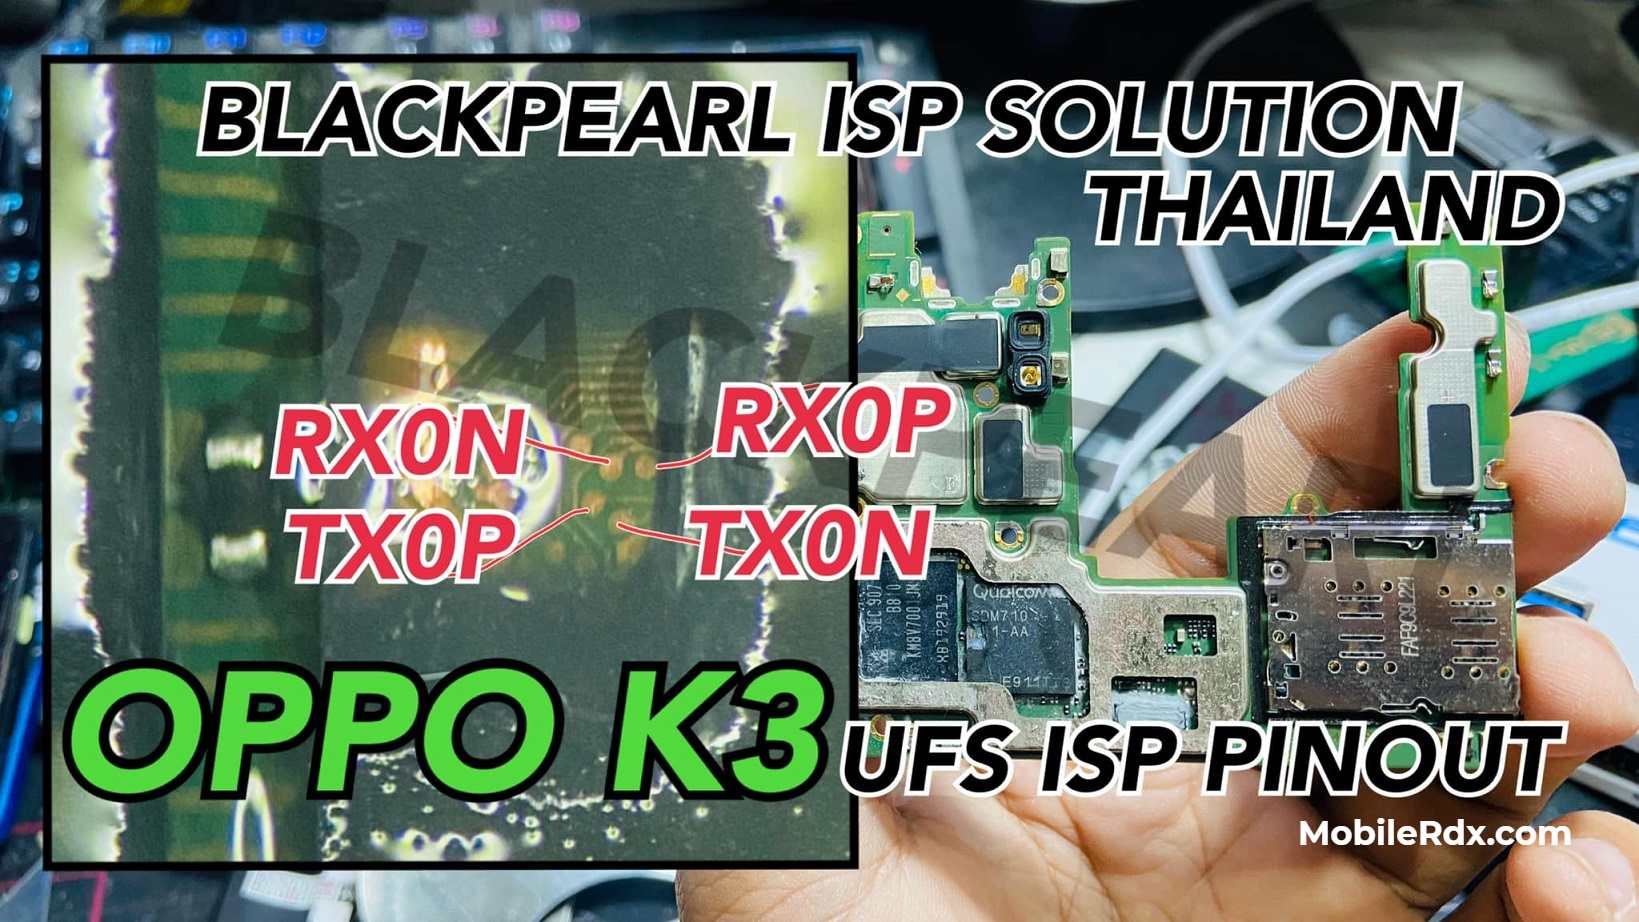 Oppo K3 UFS ISP Pinout to Remove Pattern Lock And FRP